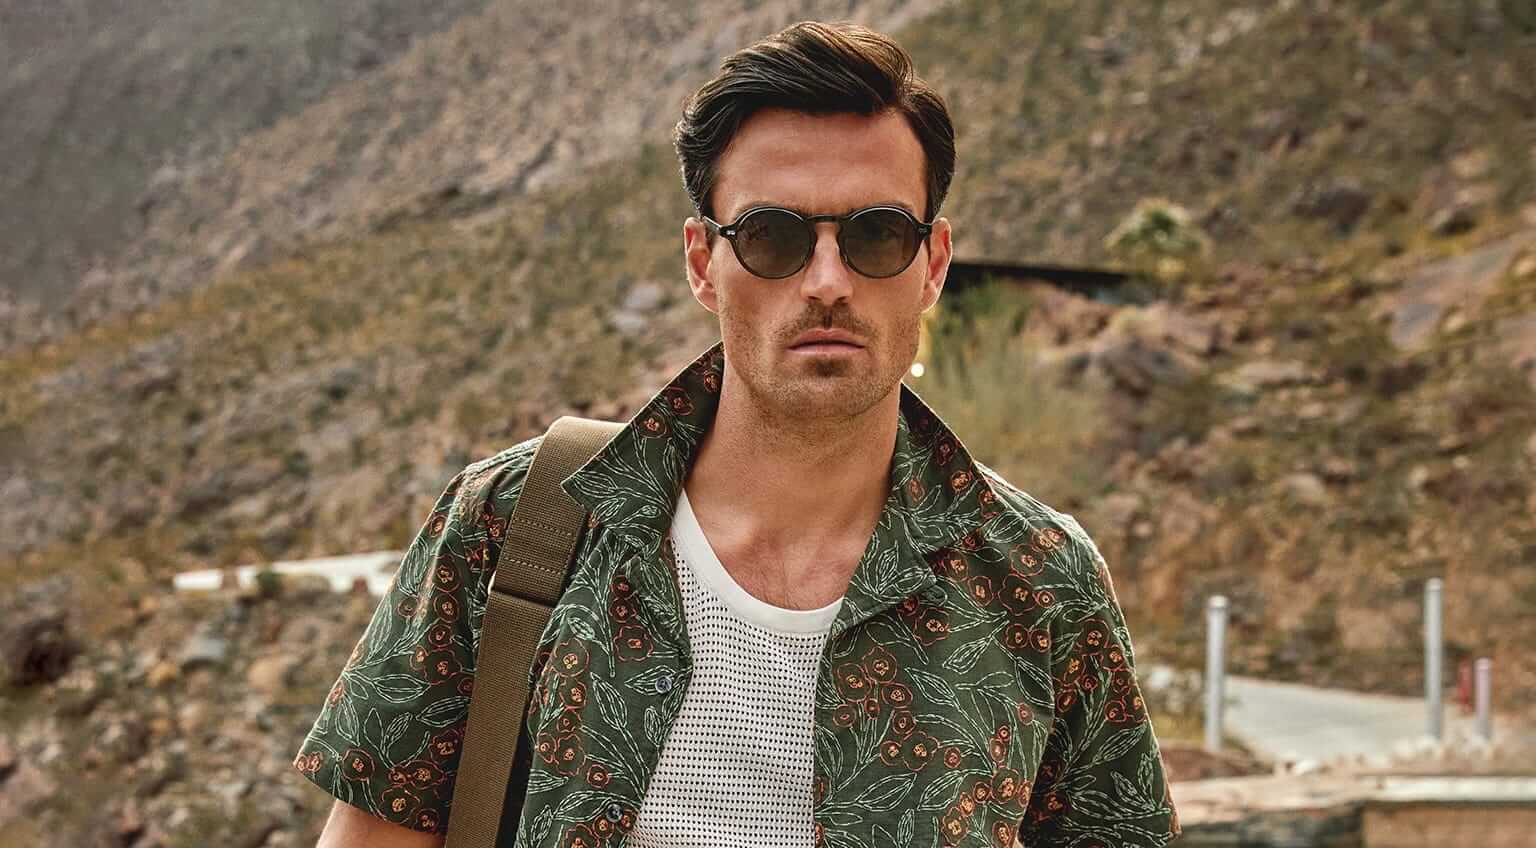 10 Camp Collar Shirts Perfect For Summer